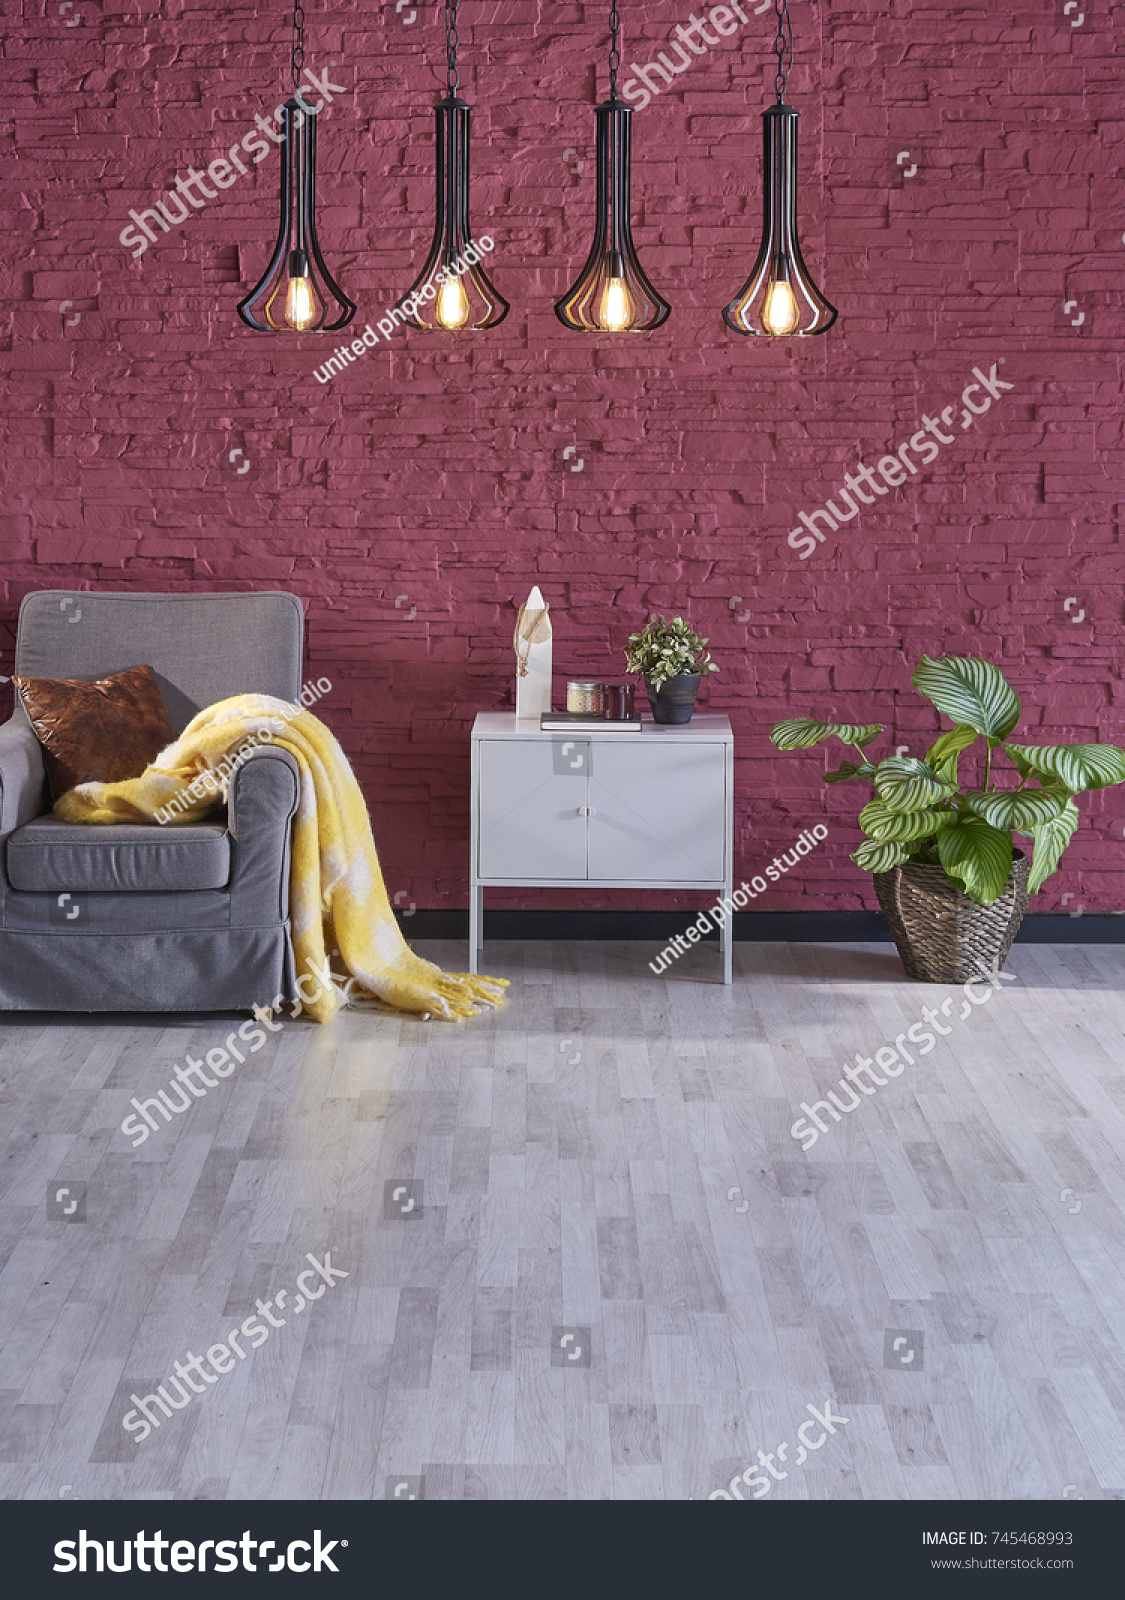 claret red brick wall interior nordic style modern apartment decoration trending #745468993